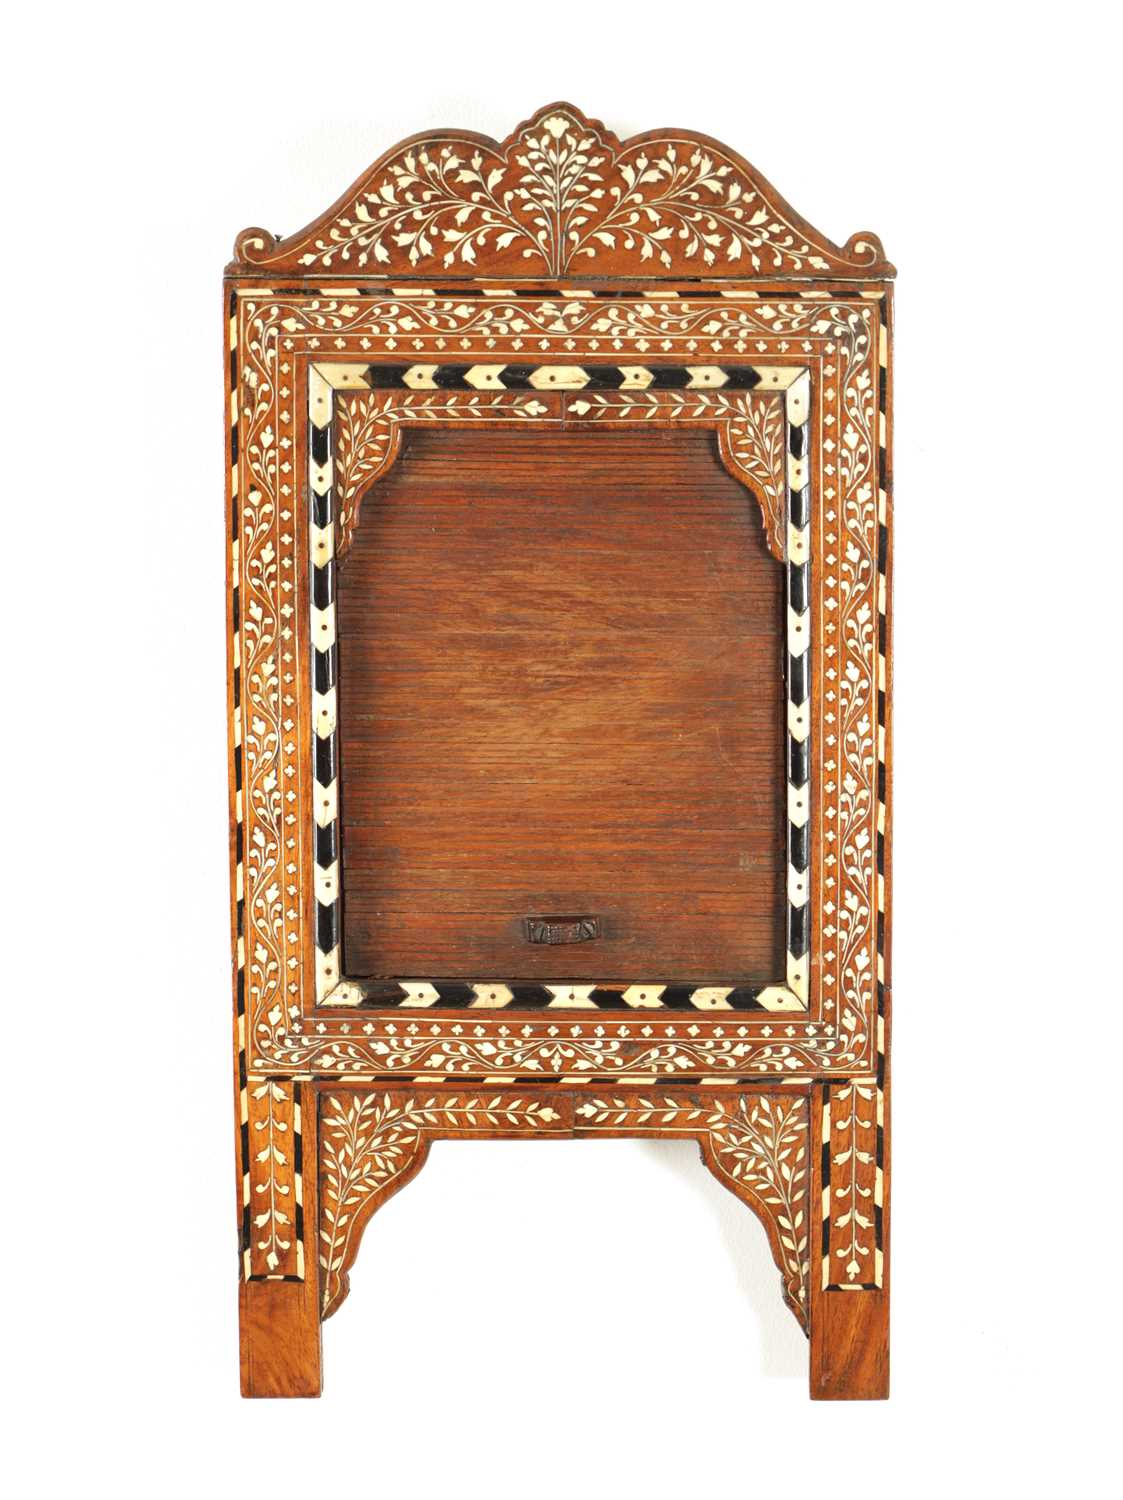 Lot 193 - A 19TH CENTURY INDIAN EBONY AND BONE INLAID HANGING MIRROR